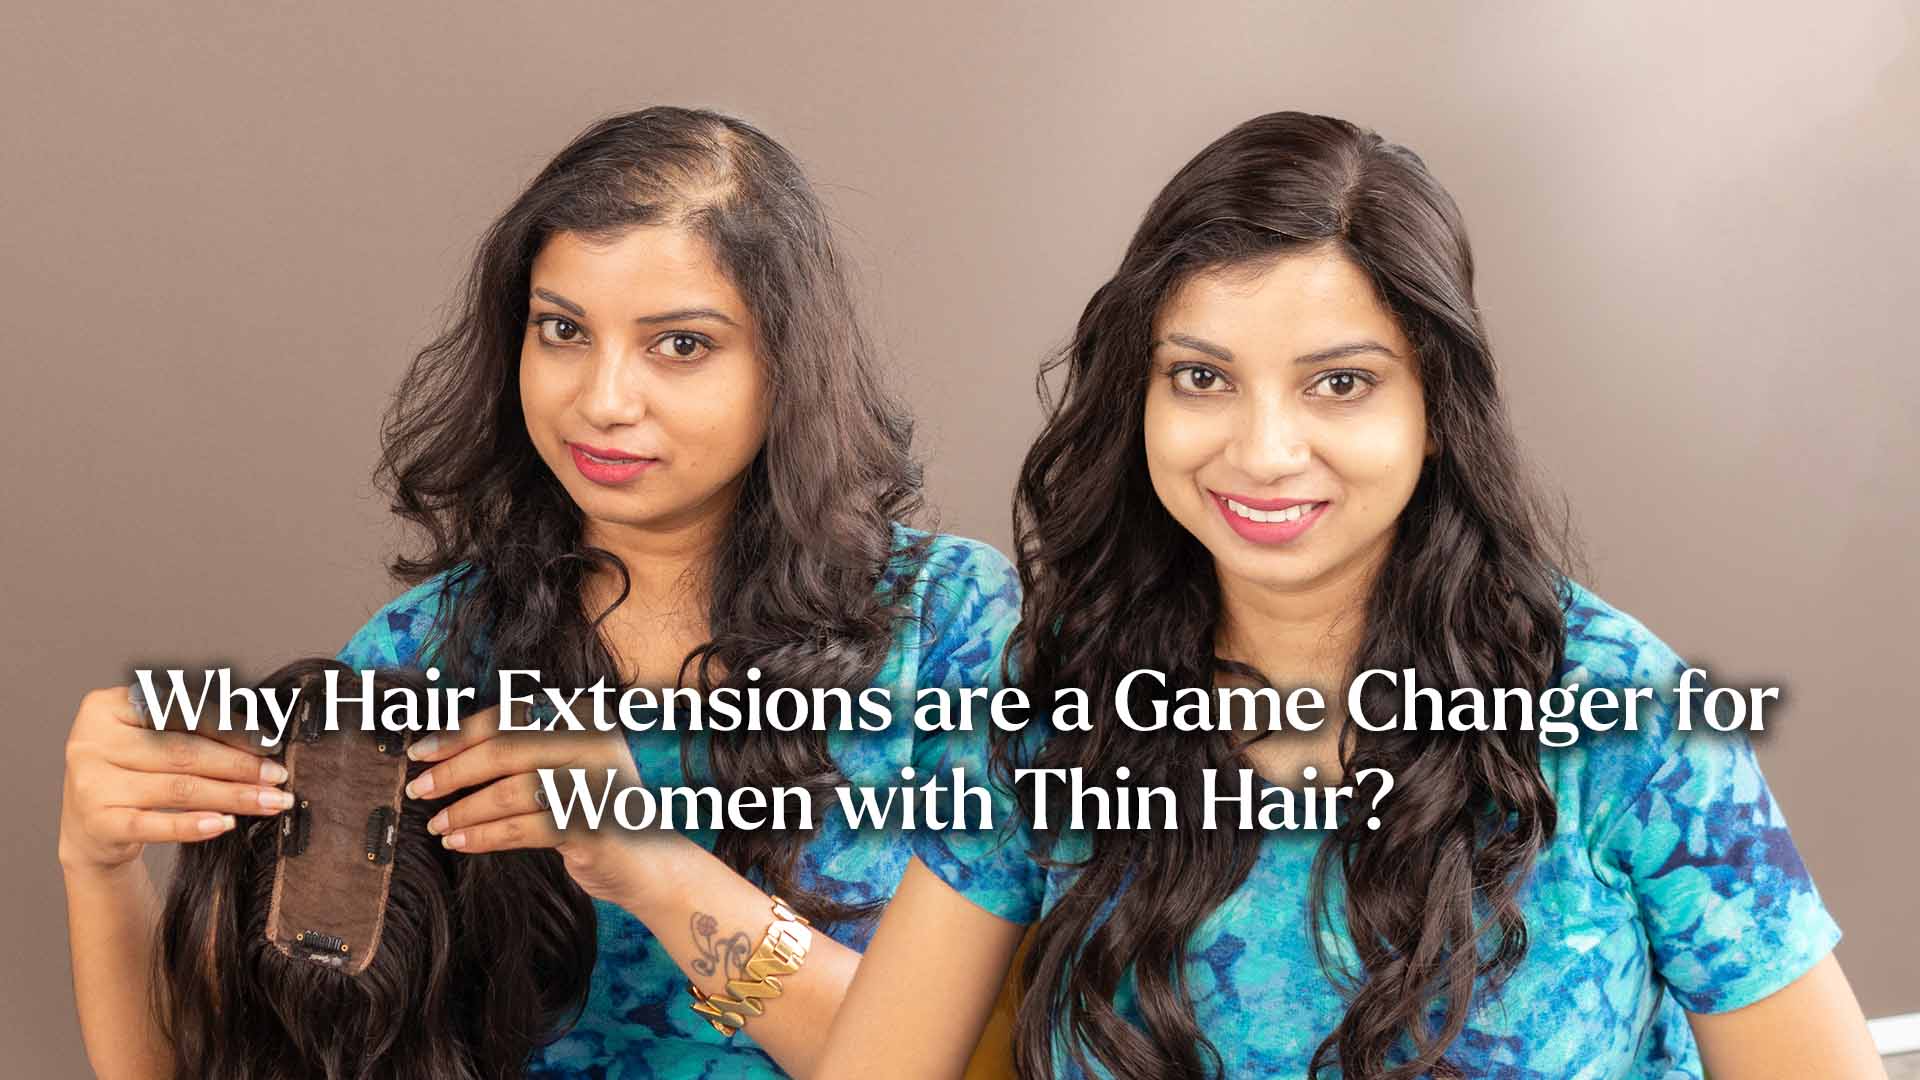 Why Hair Extensions are a Game Changer for Women with Thin Hair?